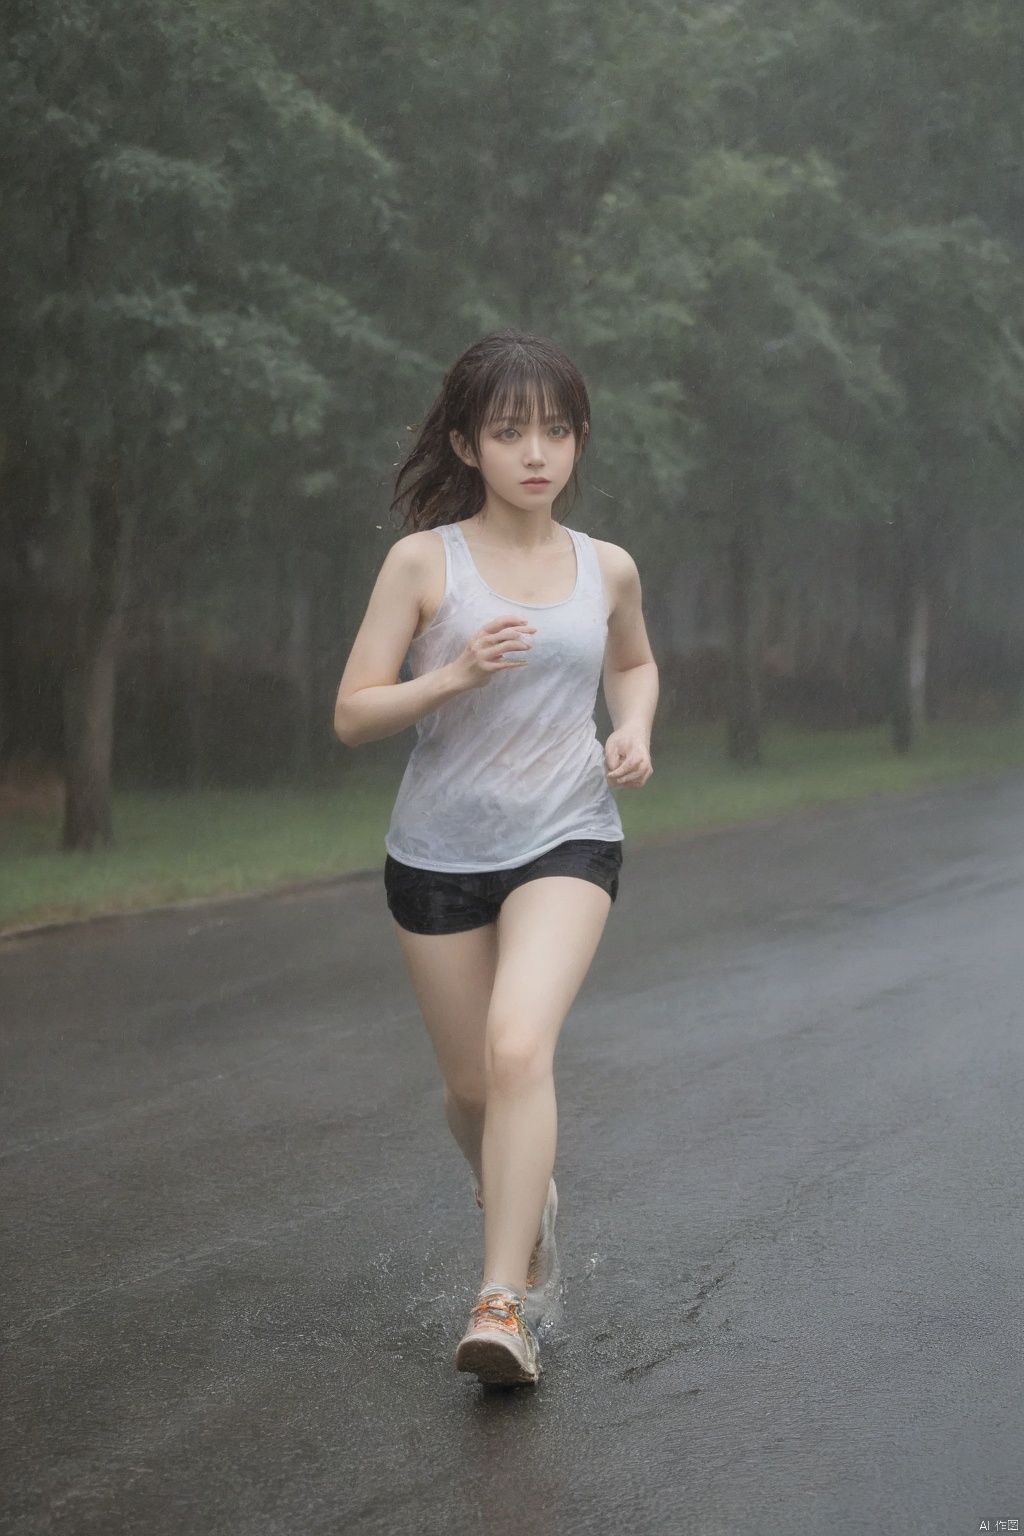 The only thing that can make me run is you except the heavy rain.